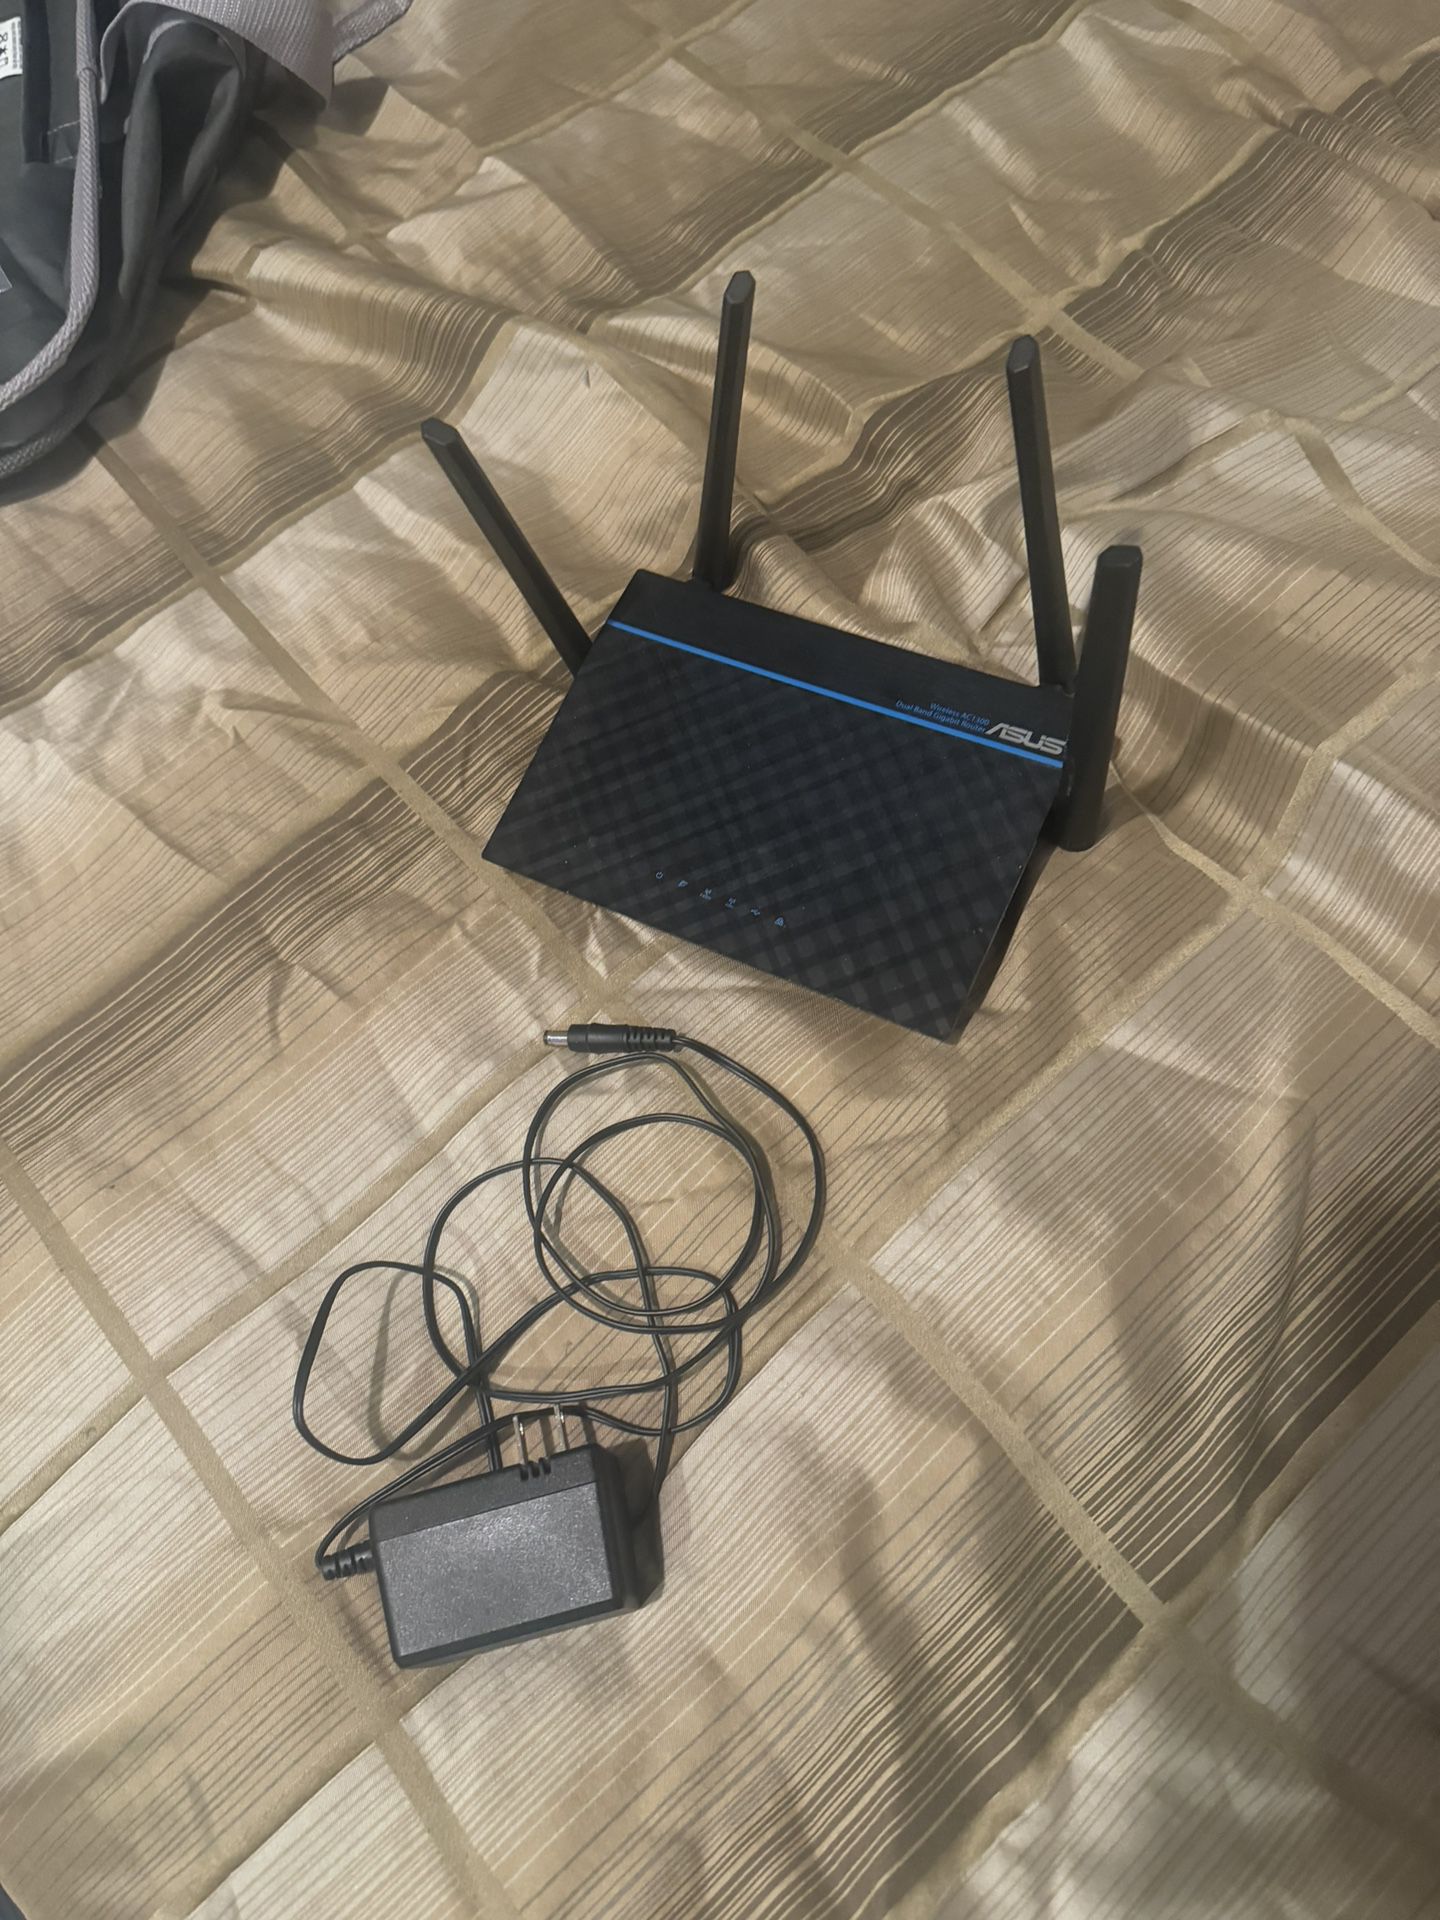 ASUS Wireless-AC1300 Dual Band Gigabit Router and modem 